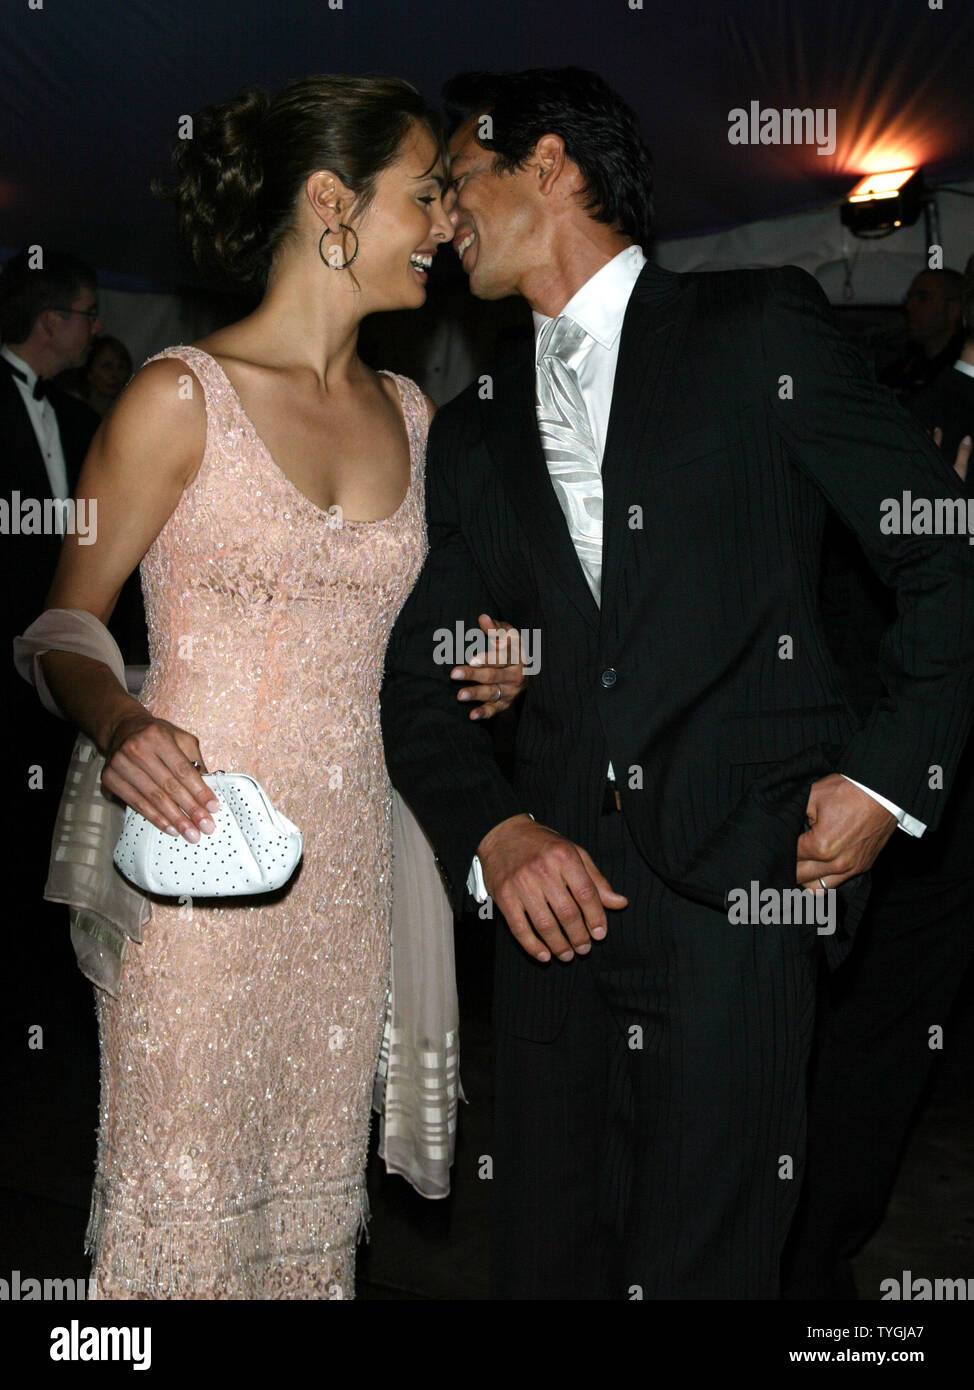 Benjamin Bratt and wife Talisa Soto pose for pictures at the Costume Institute Gala Celebrating 'Dangerous Liaisons: Fashion and Furniture in the 18th Century' at the Metropolitan Museum of Art in New York on April 26, 2004.   (UPI Photo/Laura Cavanaugh) Stock Photo